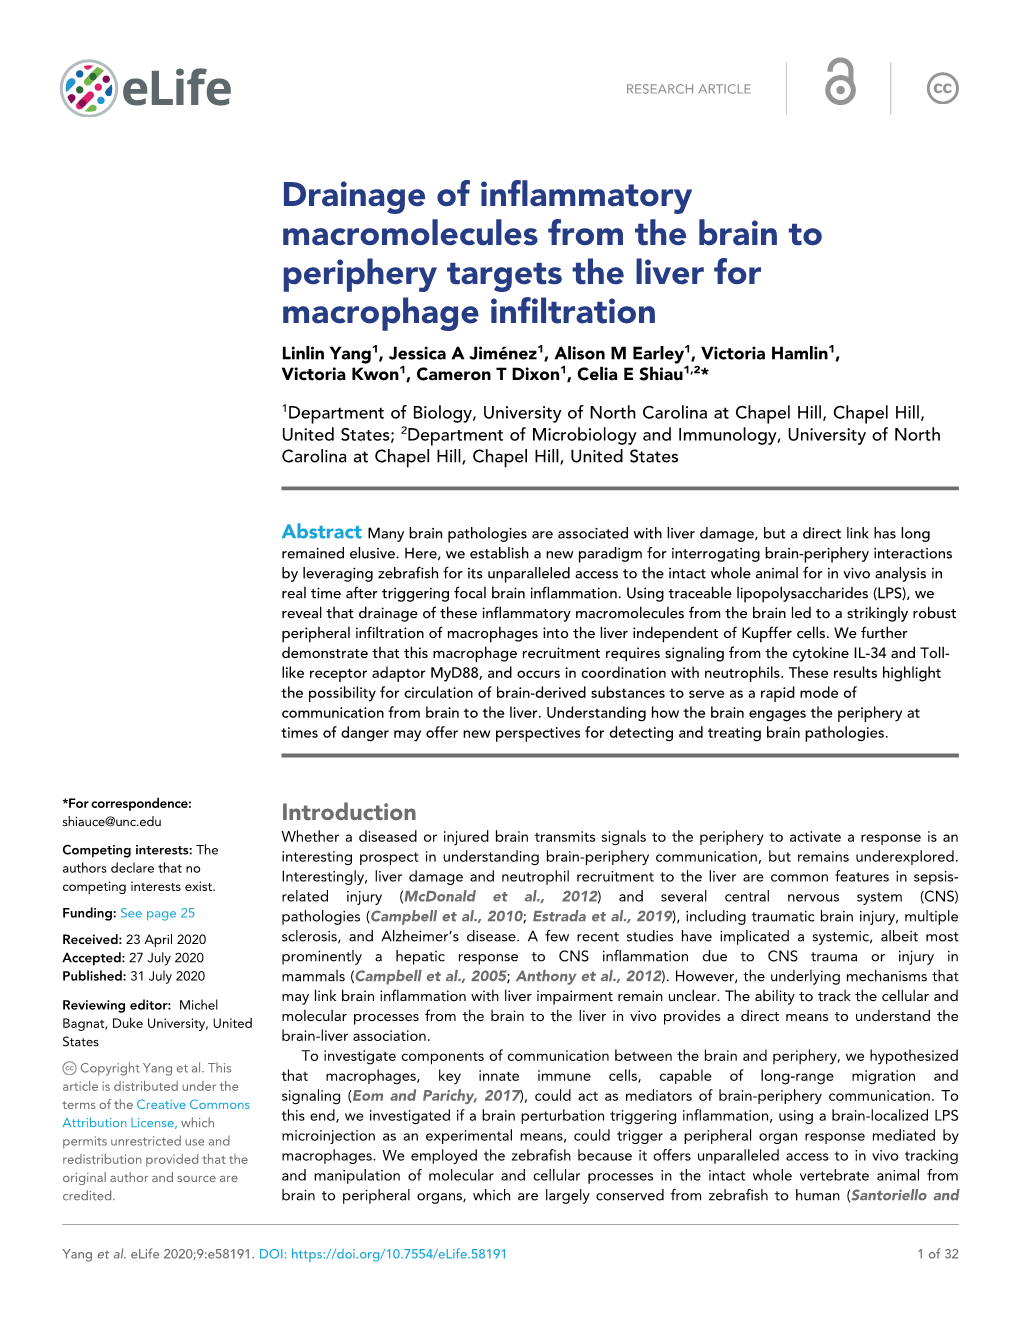 Drainage of Inflammatory Macromolecules from the Brain To